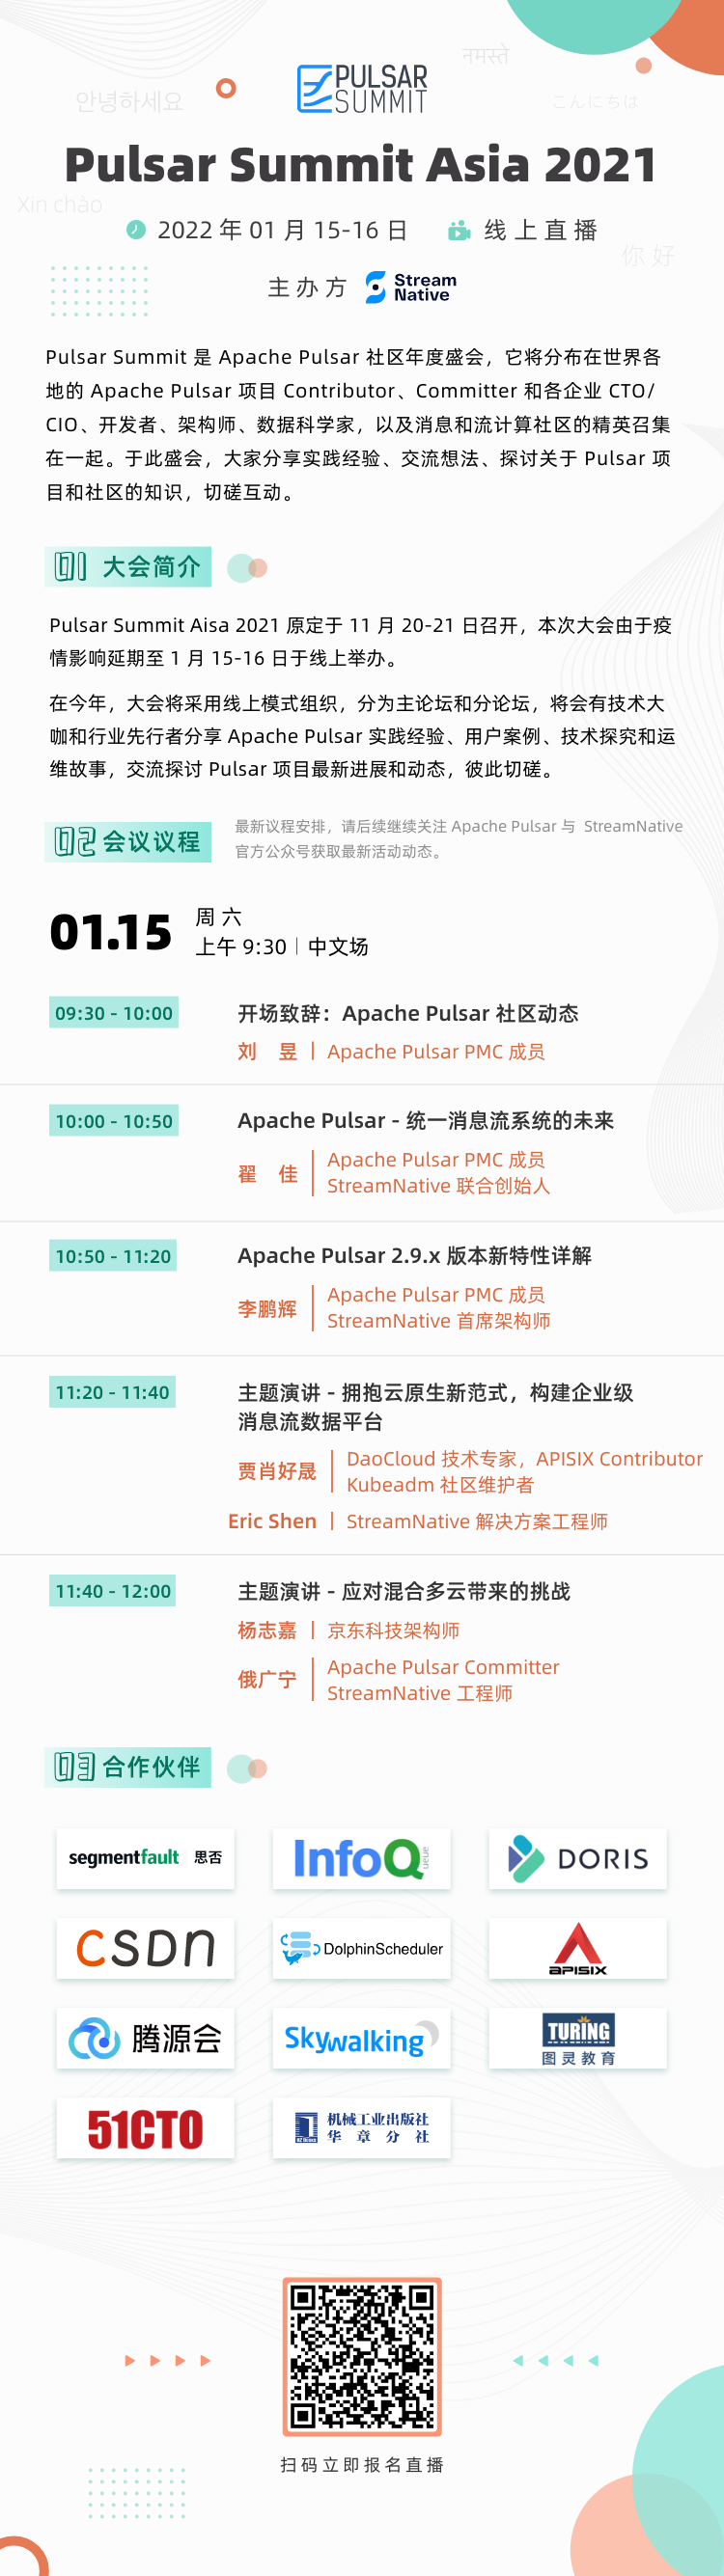 Pulsar Summit Asia 2021 日程 –1.15 上午 930 (1).png